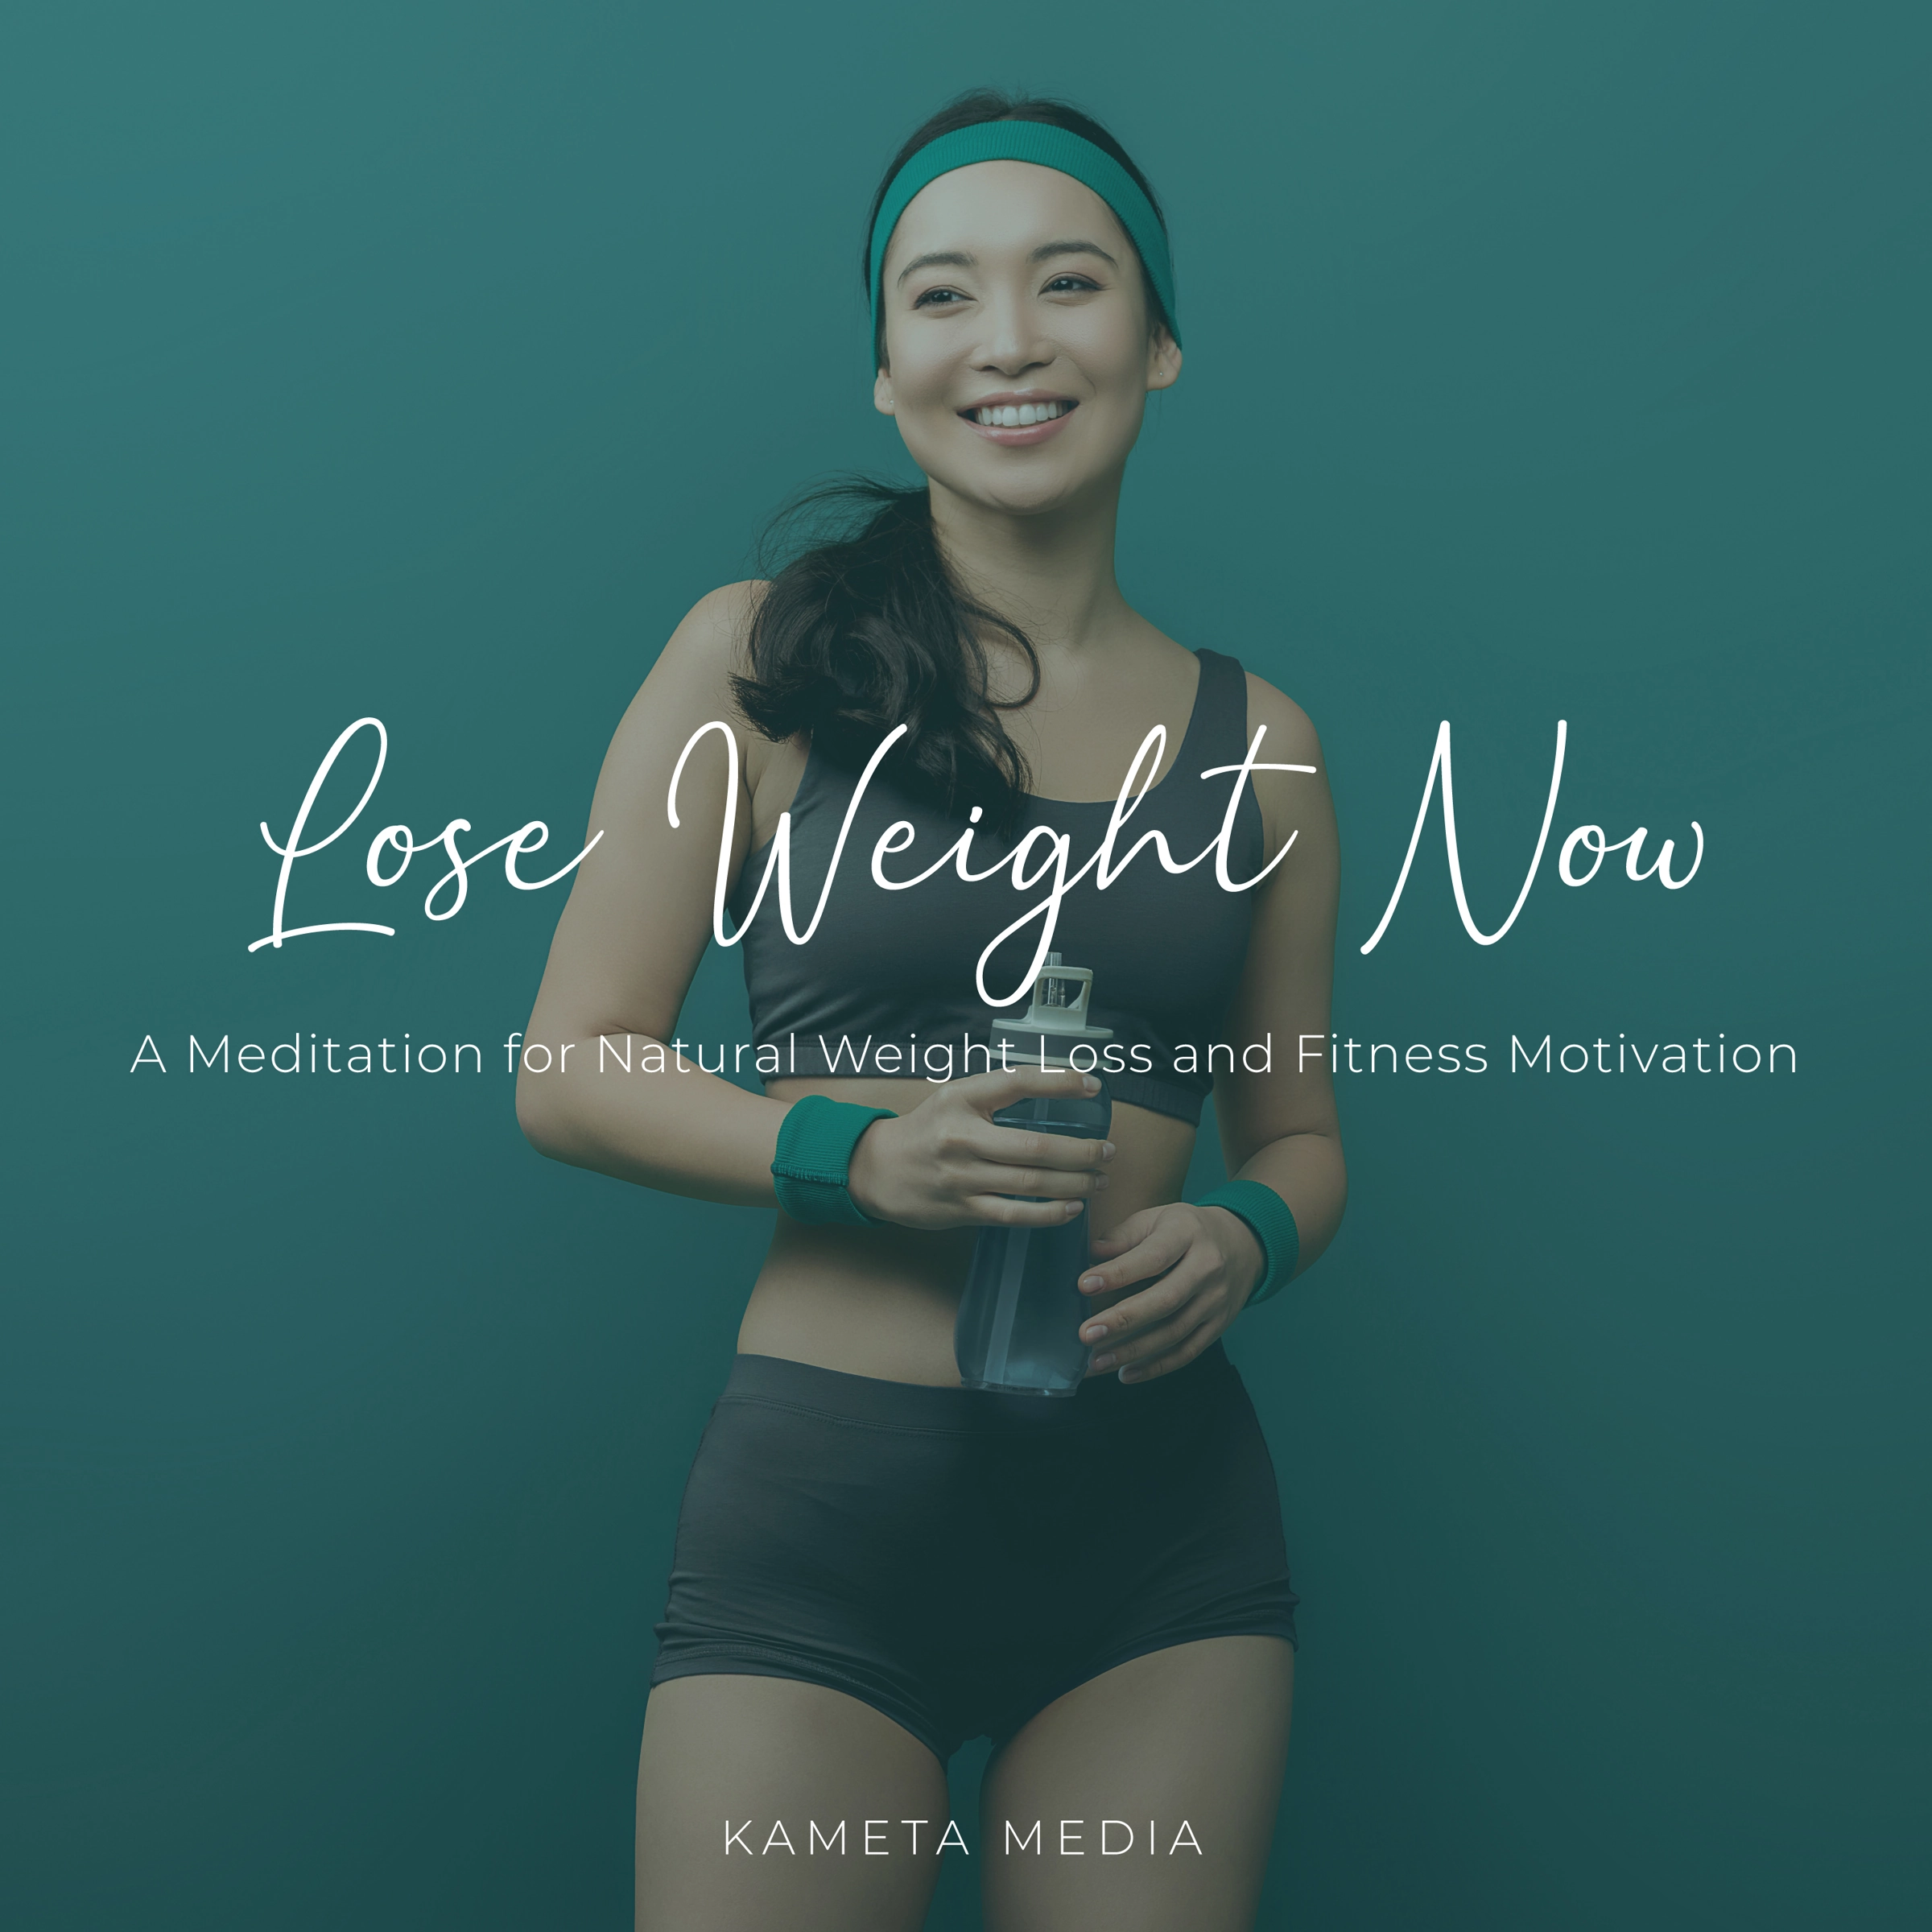 Lose Weight Now: A Meditation for Natural Weight Loss and Fitness Motivation Audiobook by Kameta Media